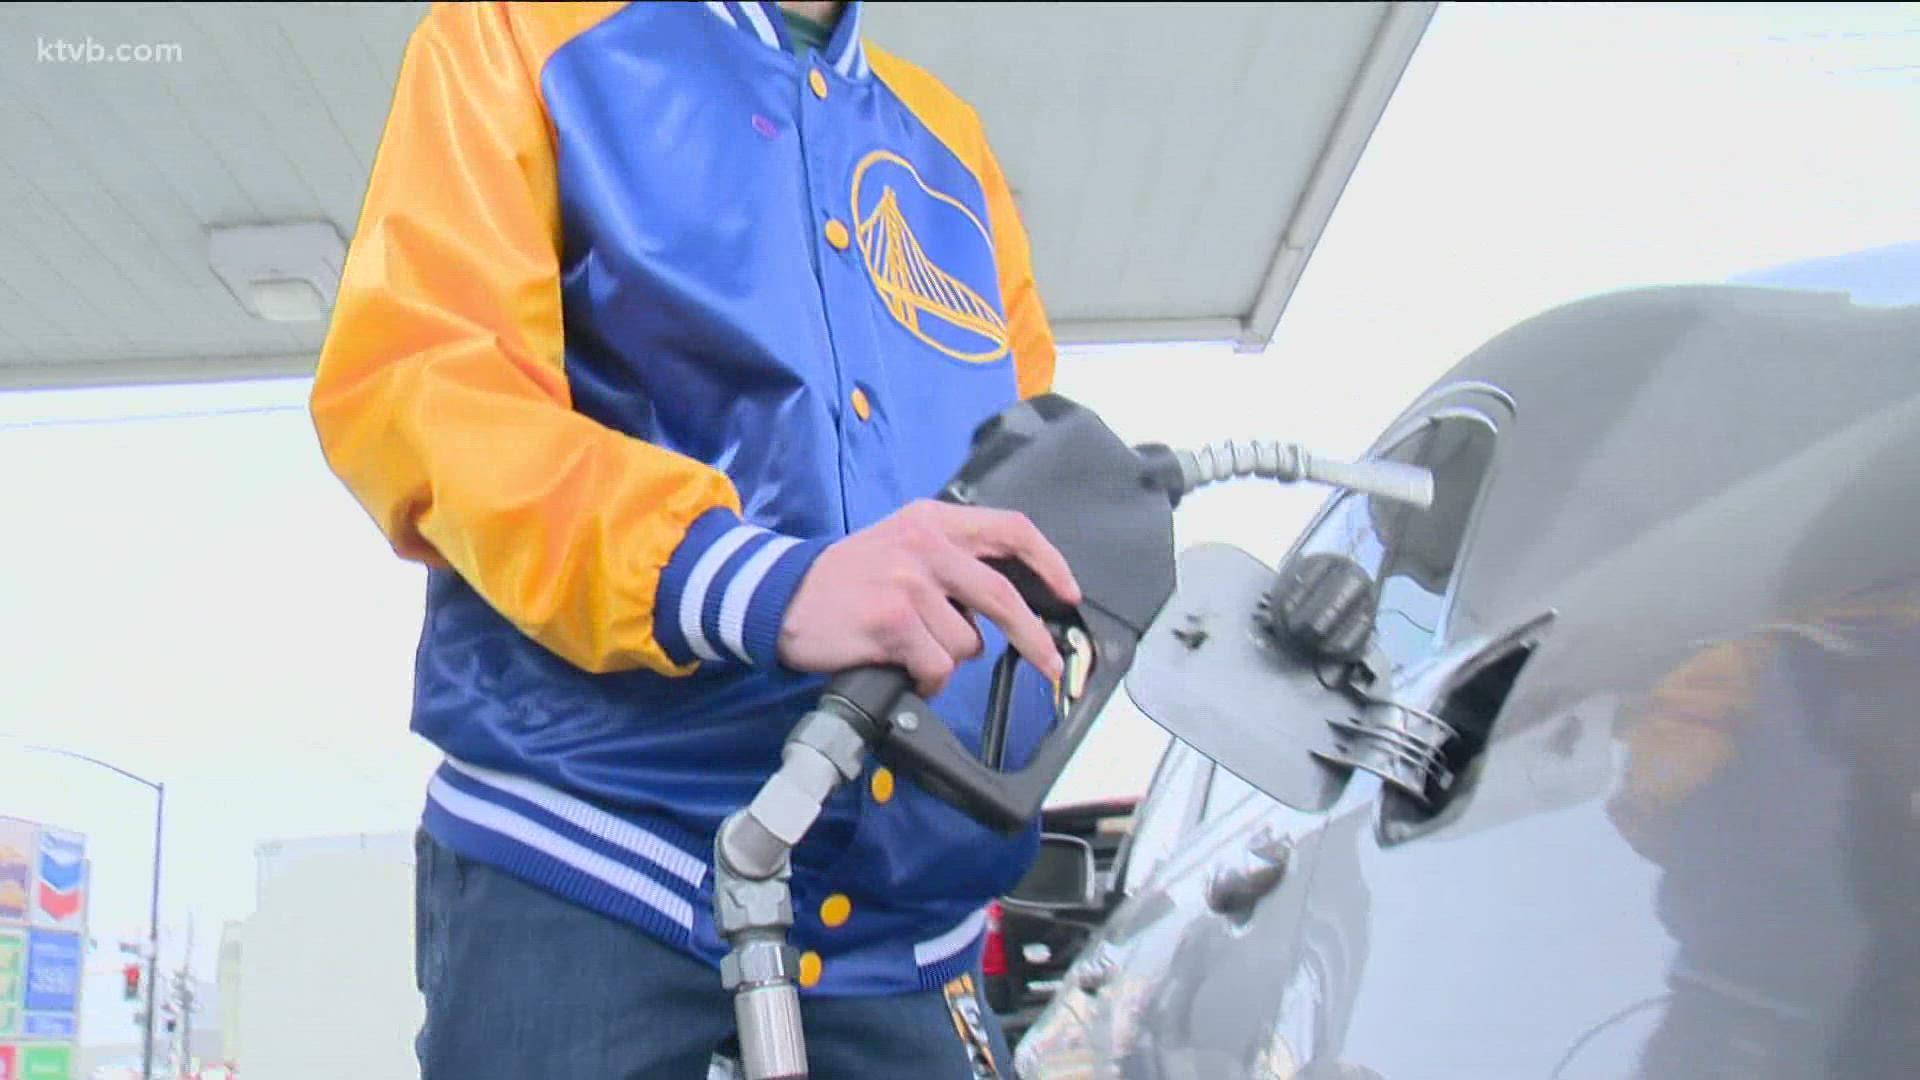 Idaho's average price for a gallon of regular gas is at $3.52, while the national average has spiked to $3.53 per gallon.